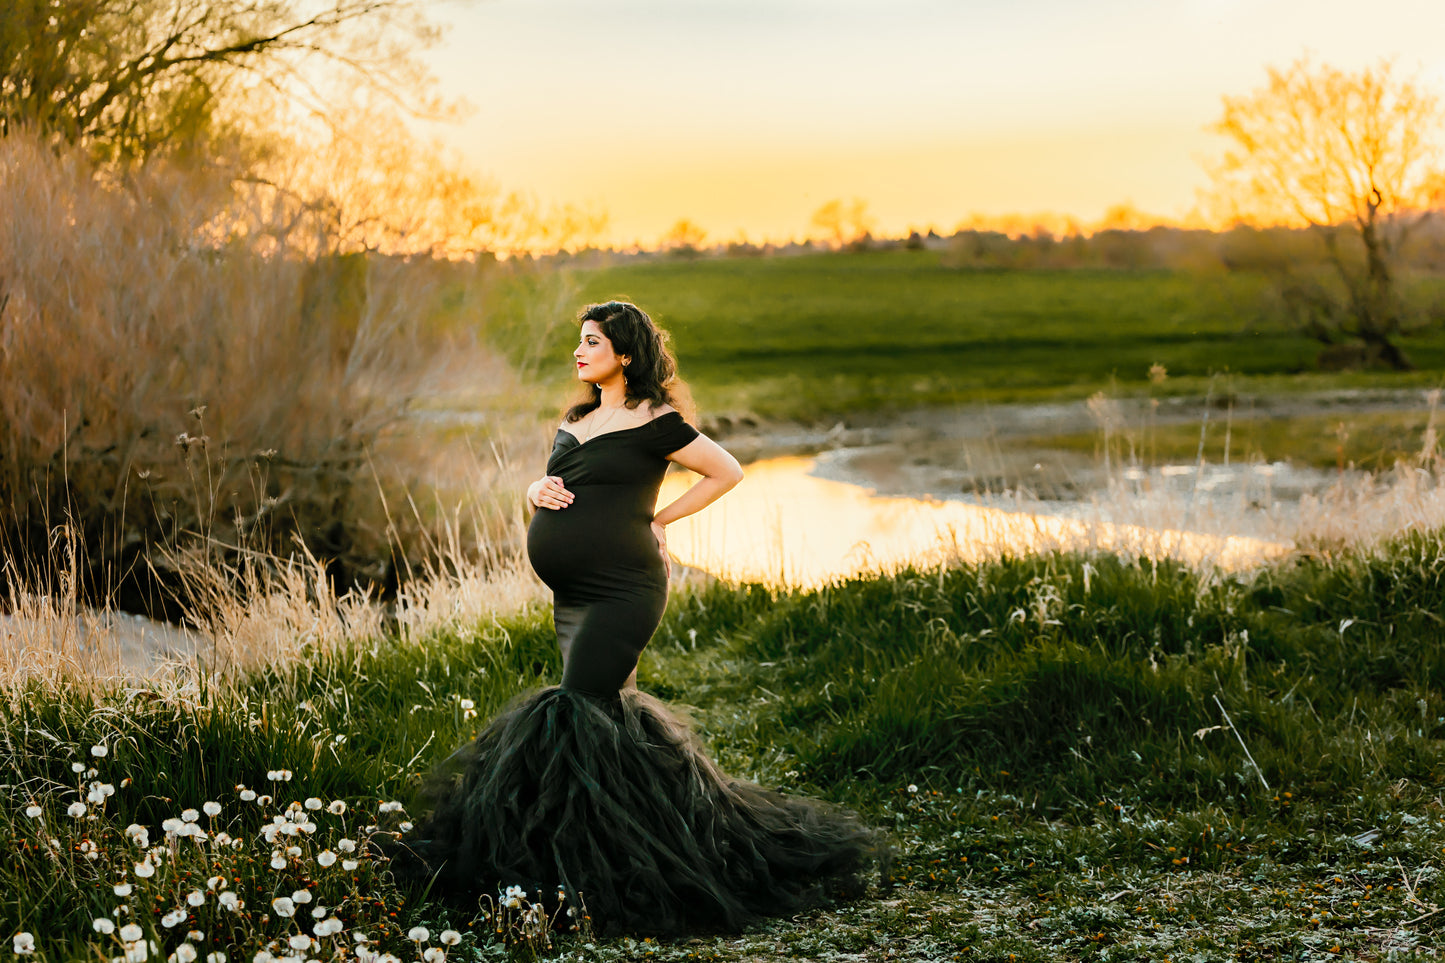 Black Fitted Tulle Mermaid Gown - maternity photoshoot dress